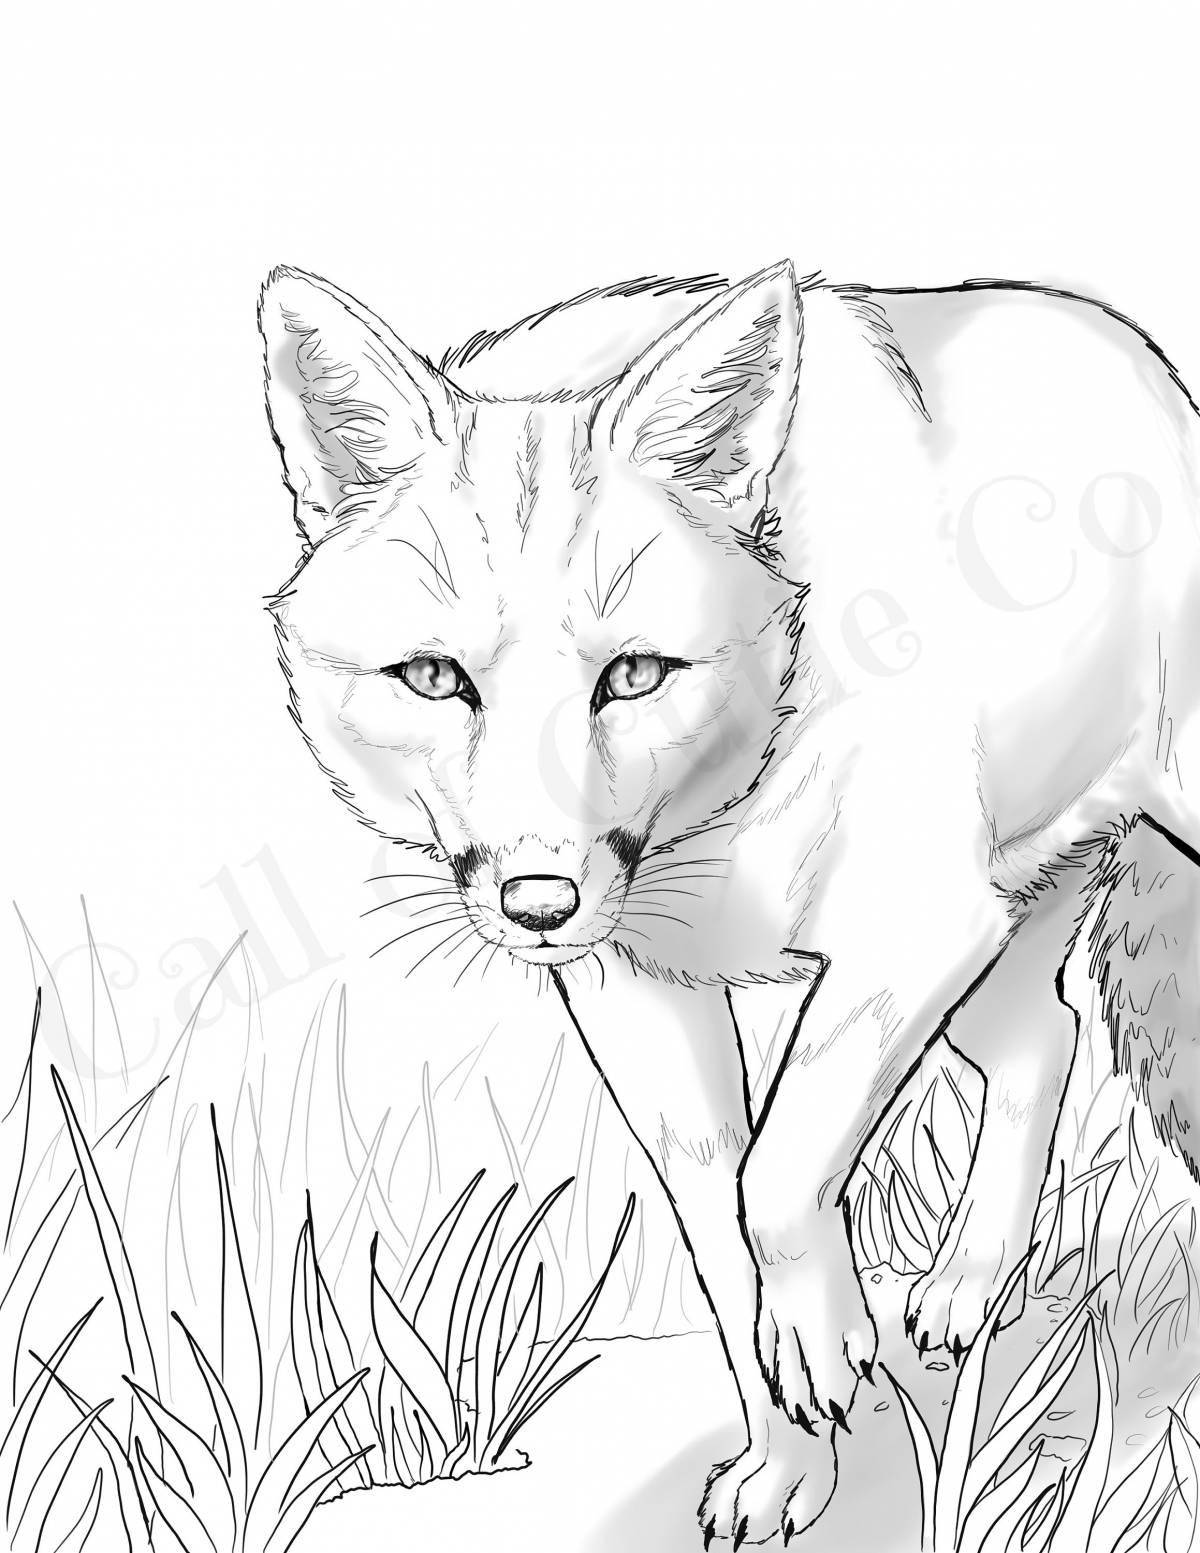 Coloring bright red foxes